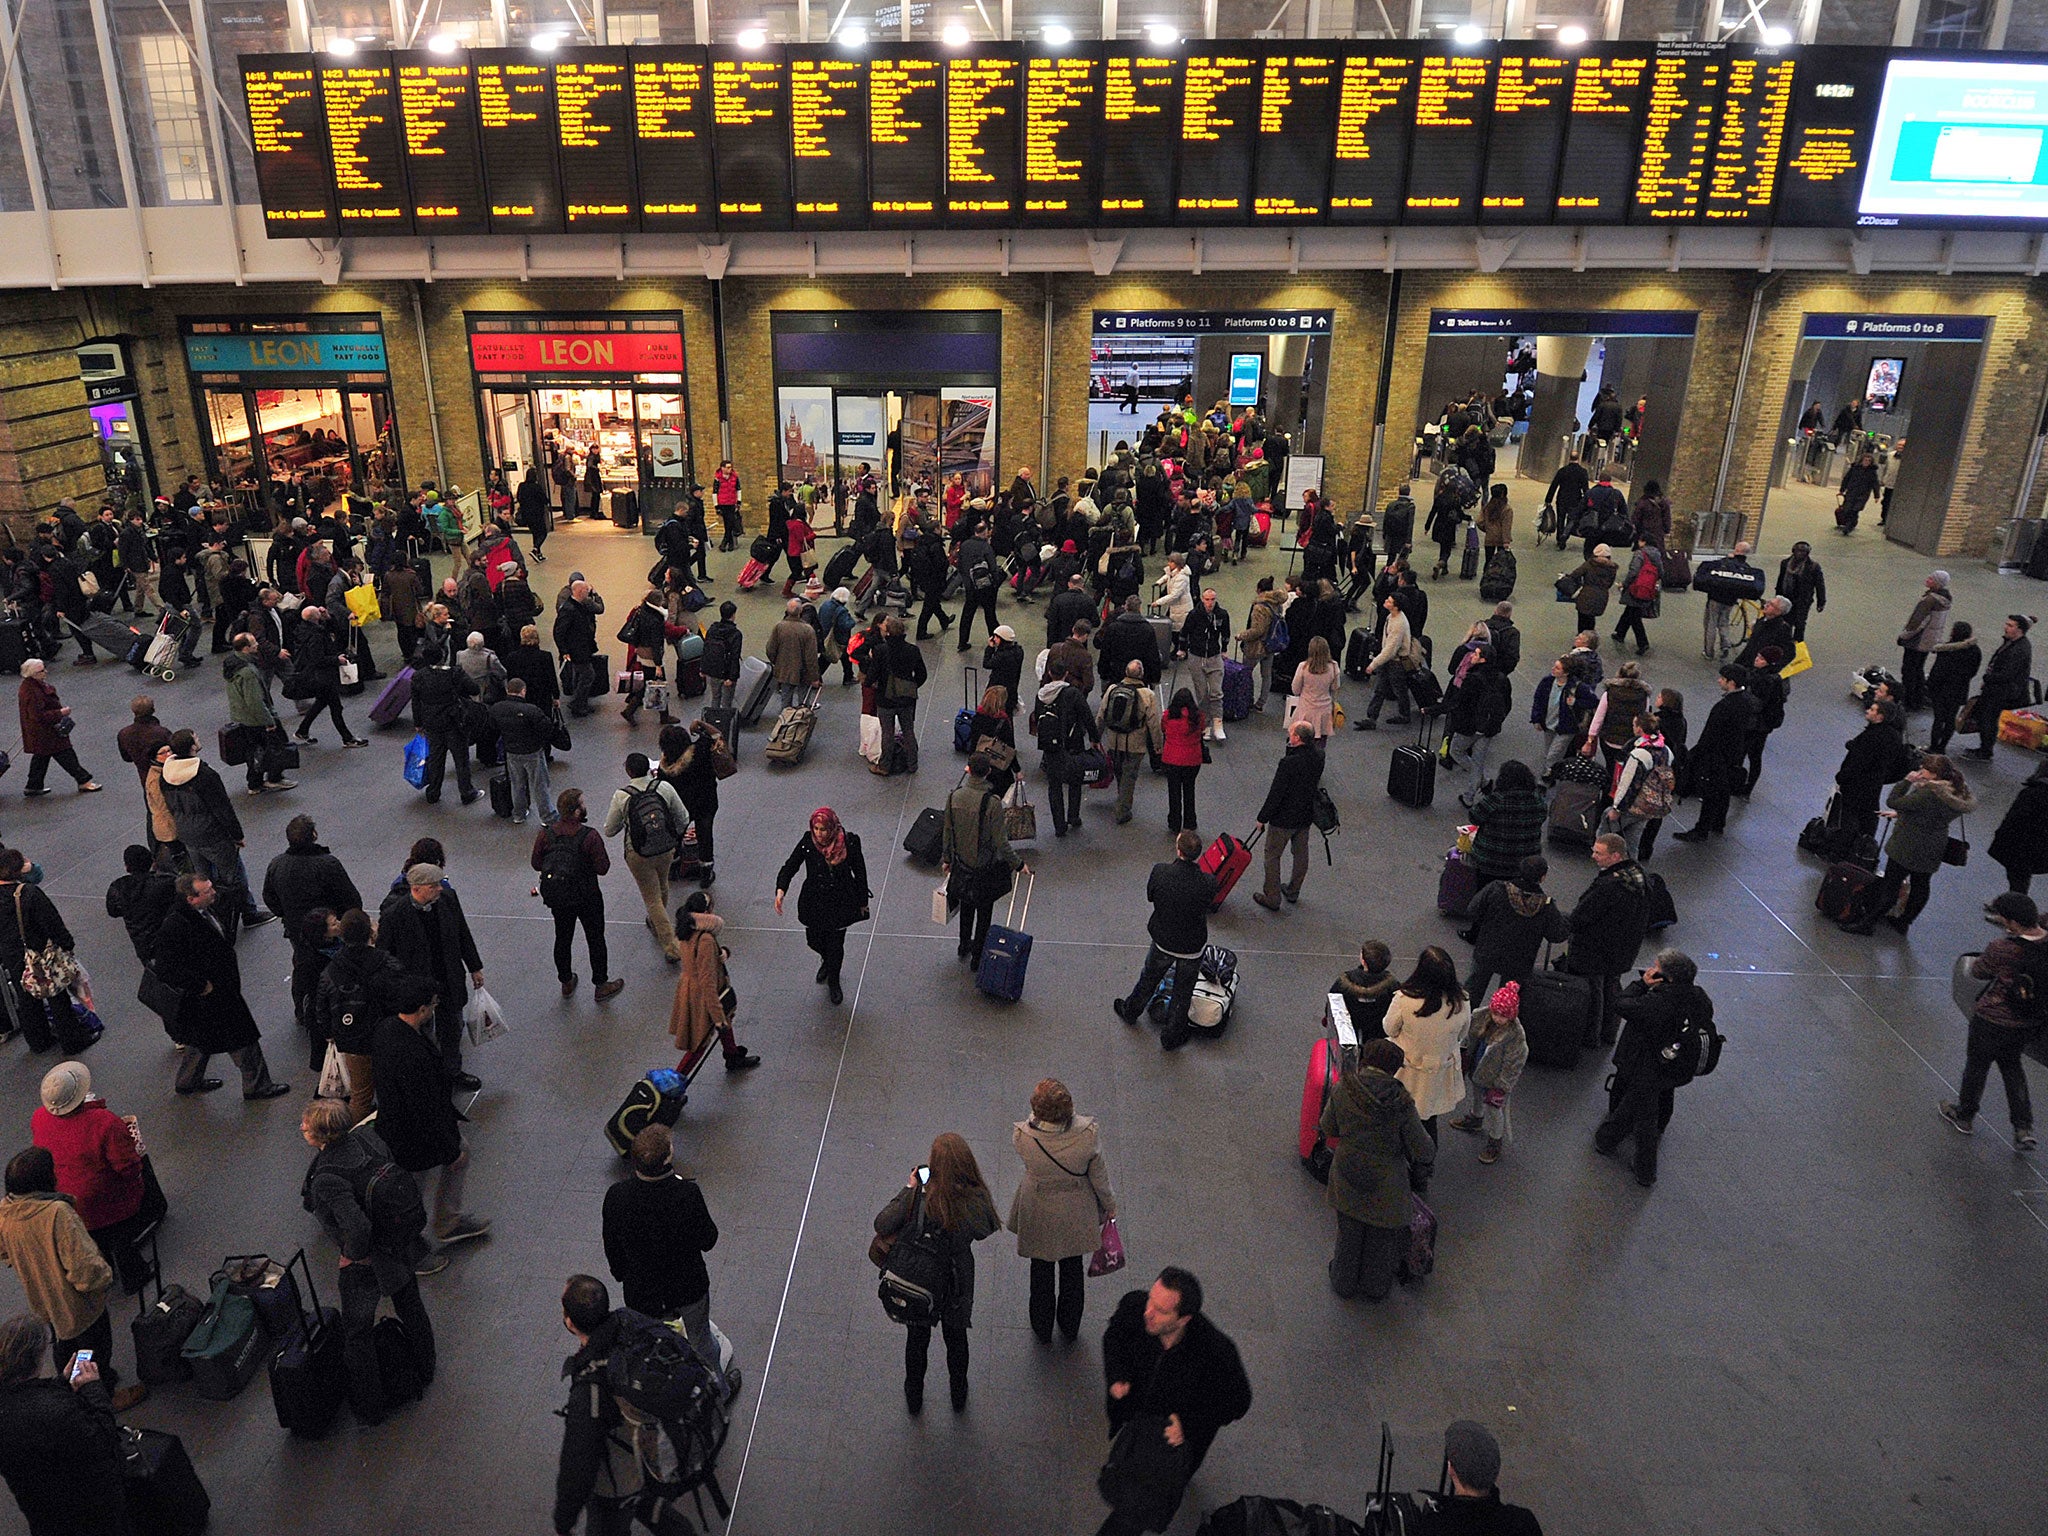 Network Rail said 'people will still be able to make their journey'